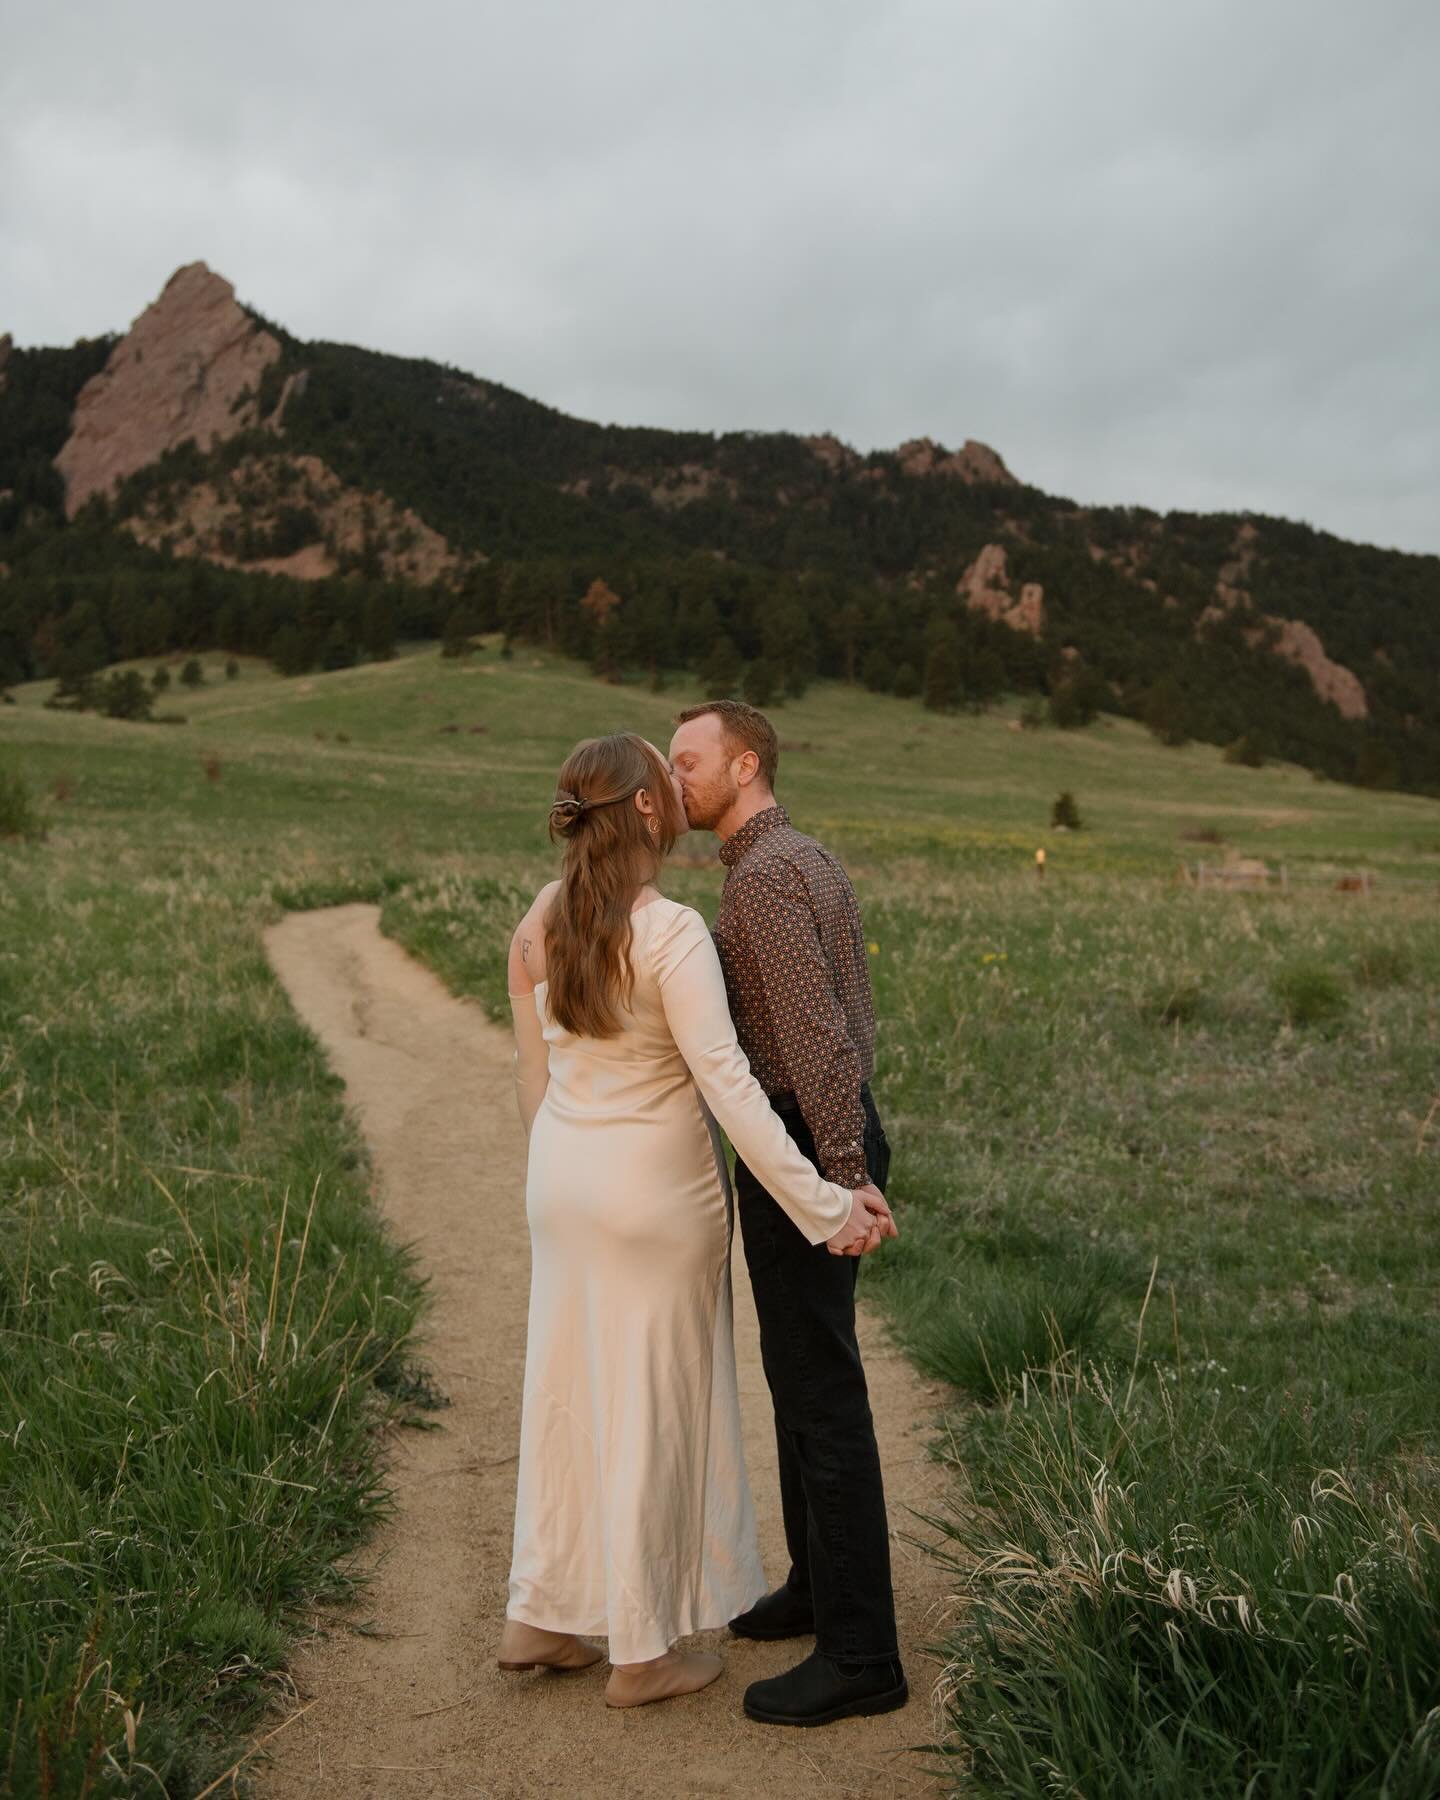 Sunrise in Boulder, CO with Franny &amp; Val, the day before their backyard wedding. We can&rsquo;t get over the sunrise glow on the two of them! While shooting we were joined by a fox and some beautiful birds. It was a magic morning 🦢🤍